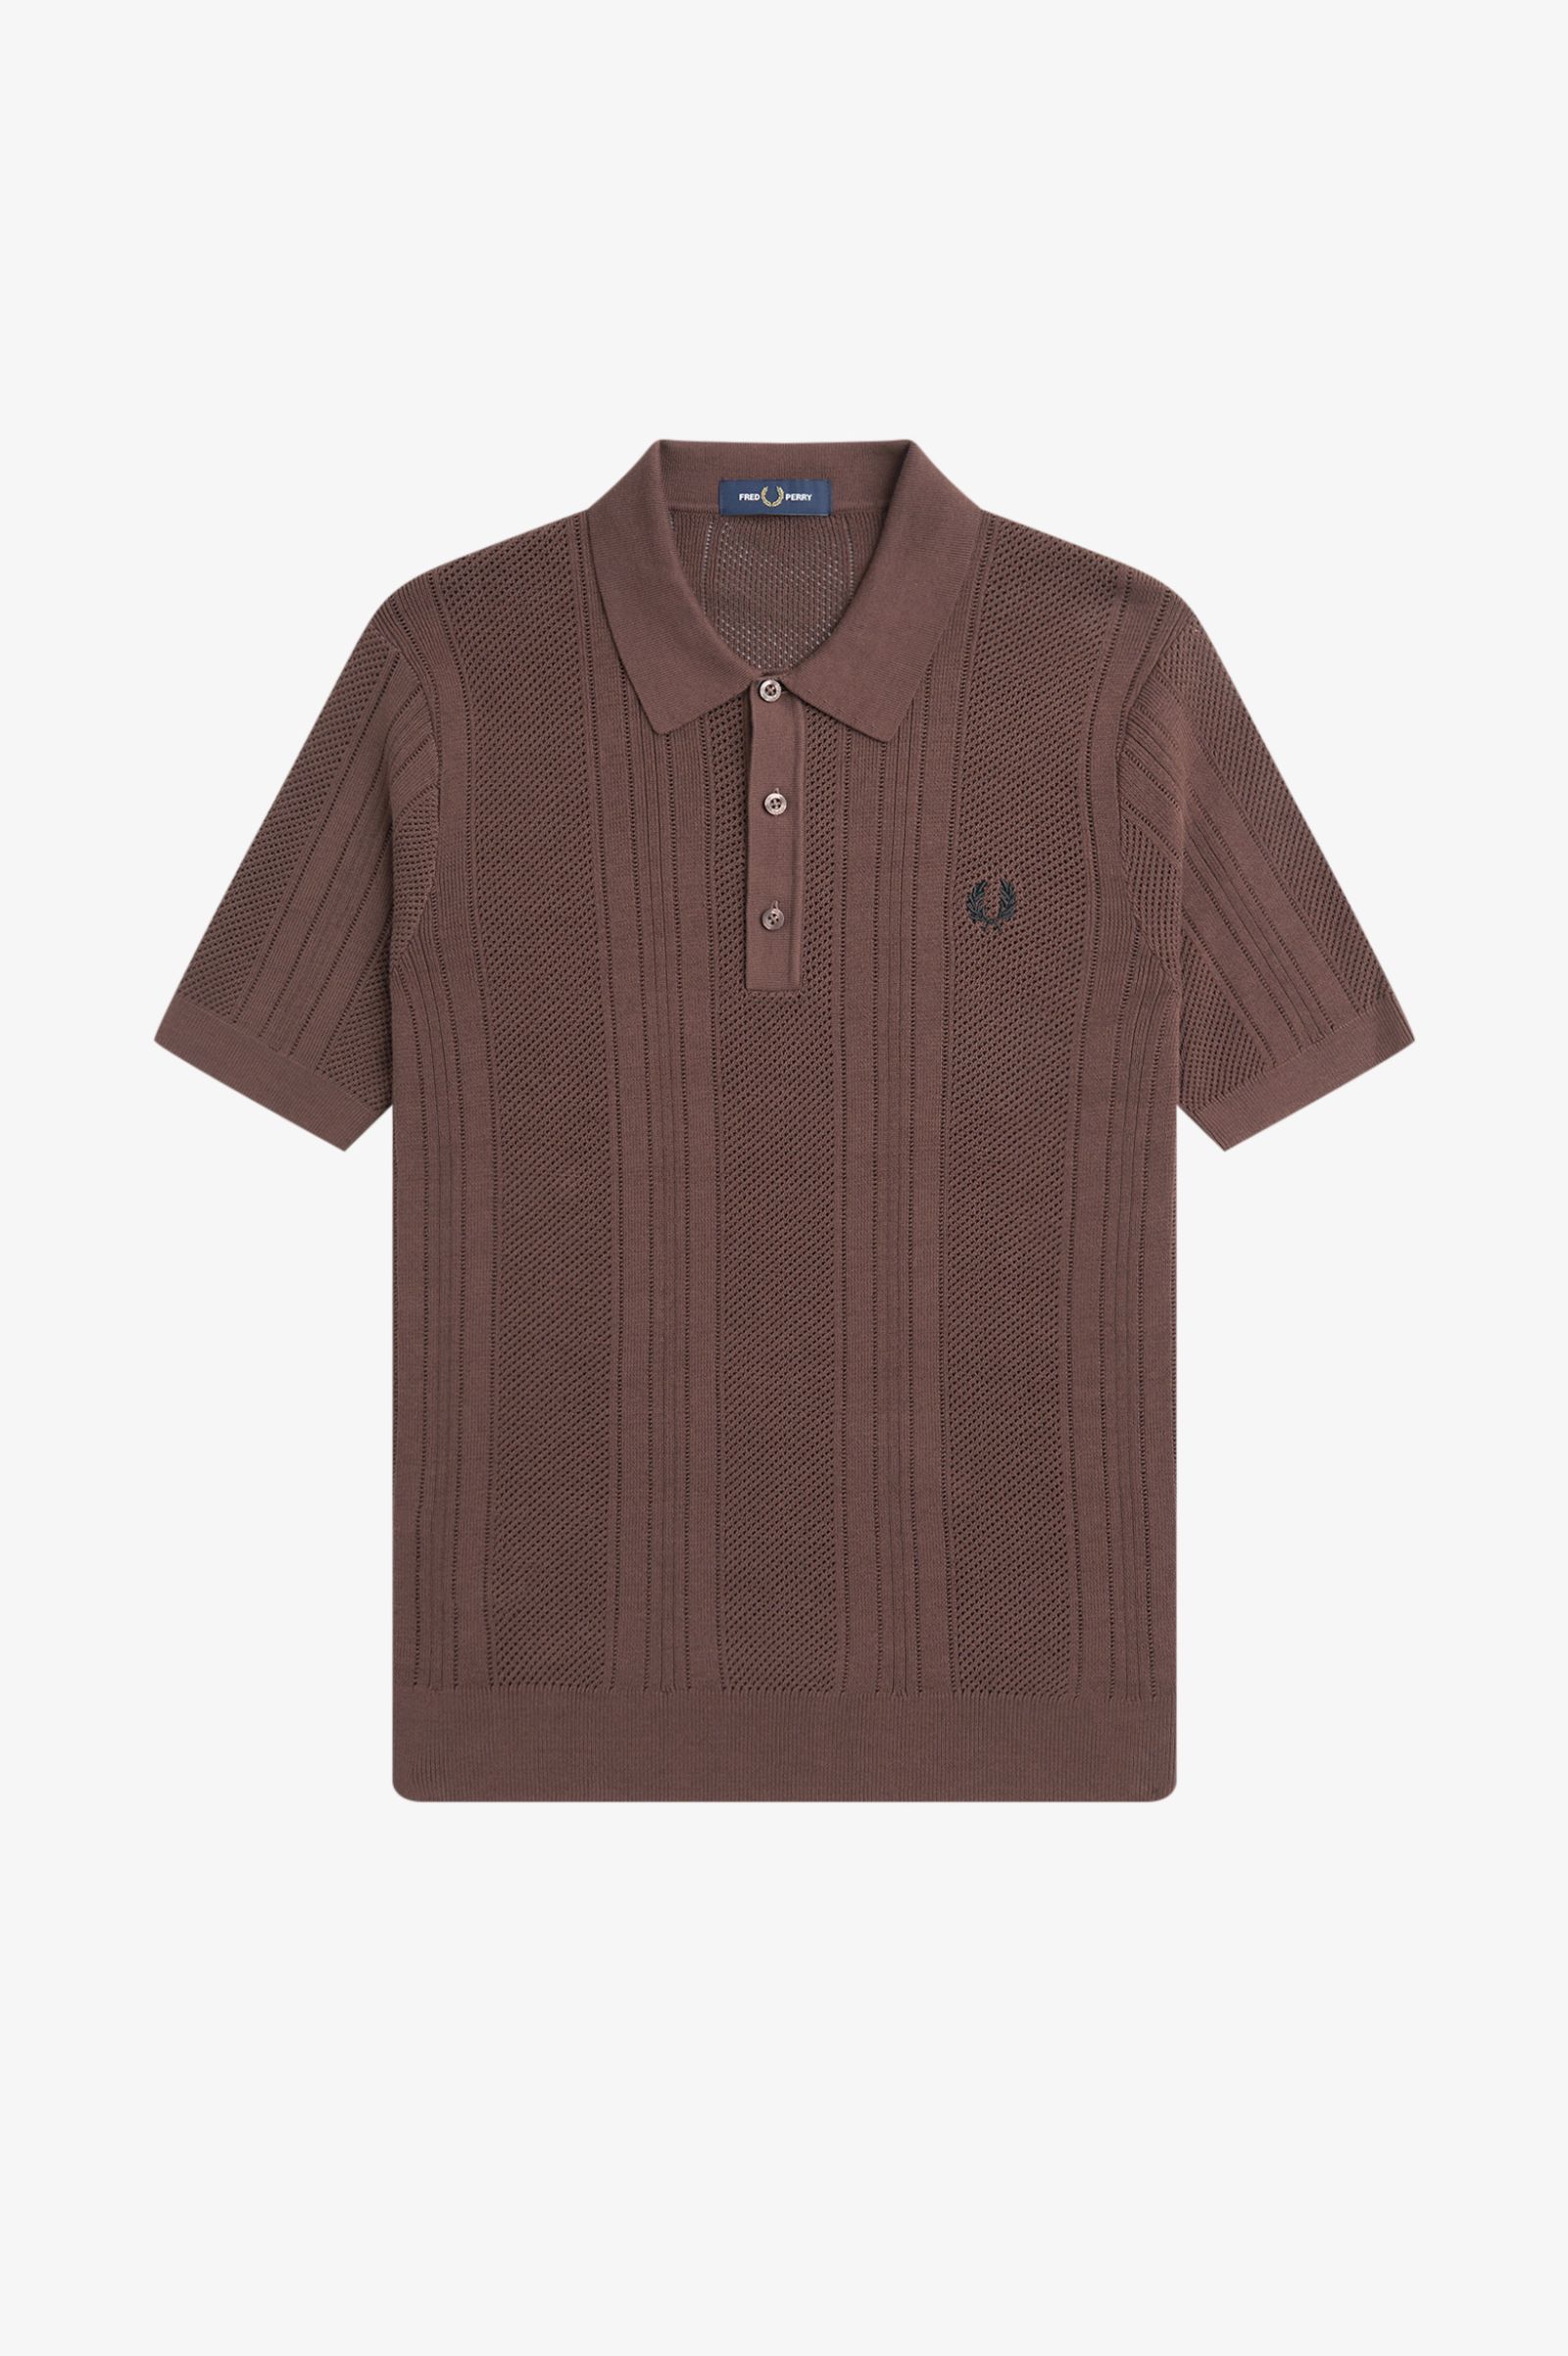 Fred Perry Crochet Knit Polo-Shirt in Carrington Brick 